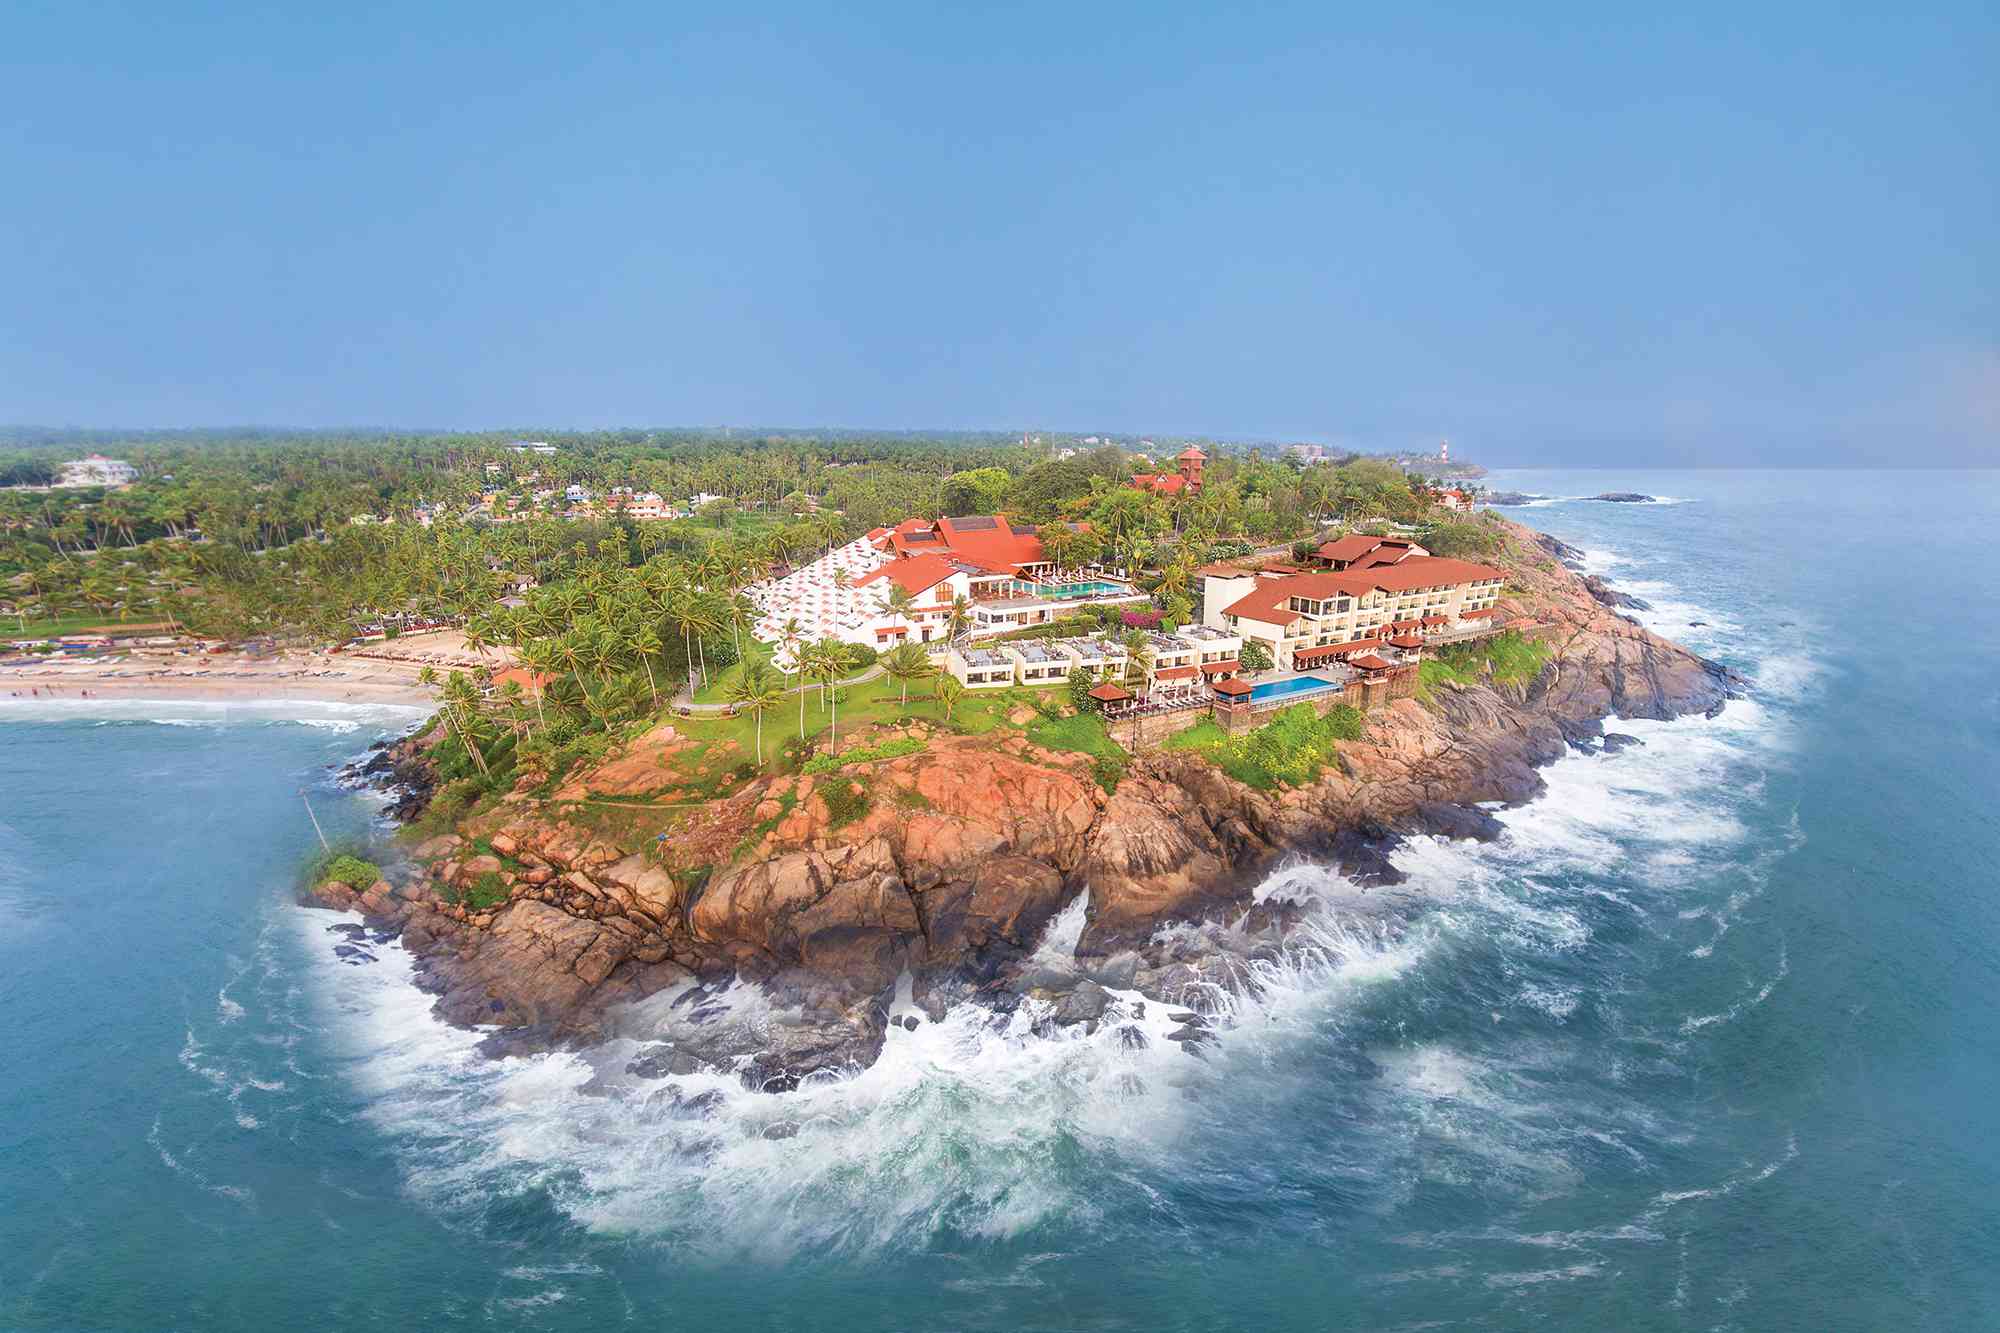 this seaside hotel in india is one of the best in the world — with 2 infinity pools, an ayurvedic spa, and gorgeous views